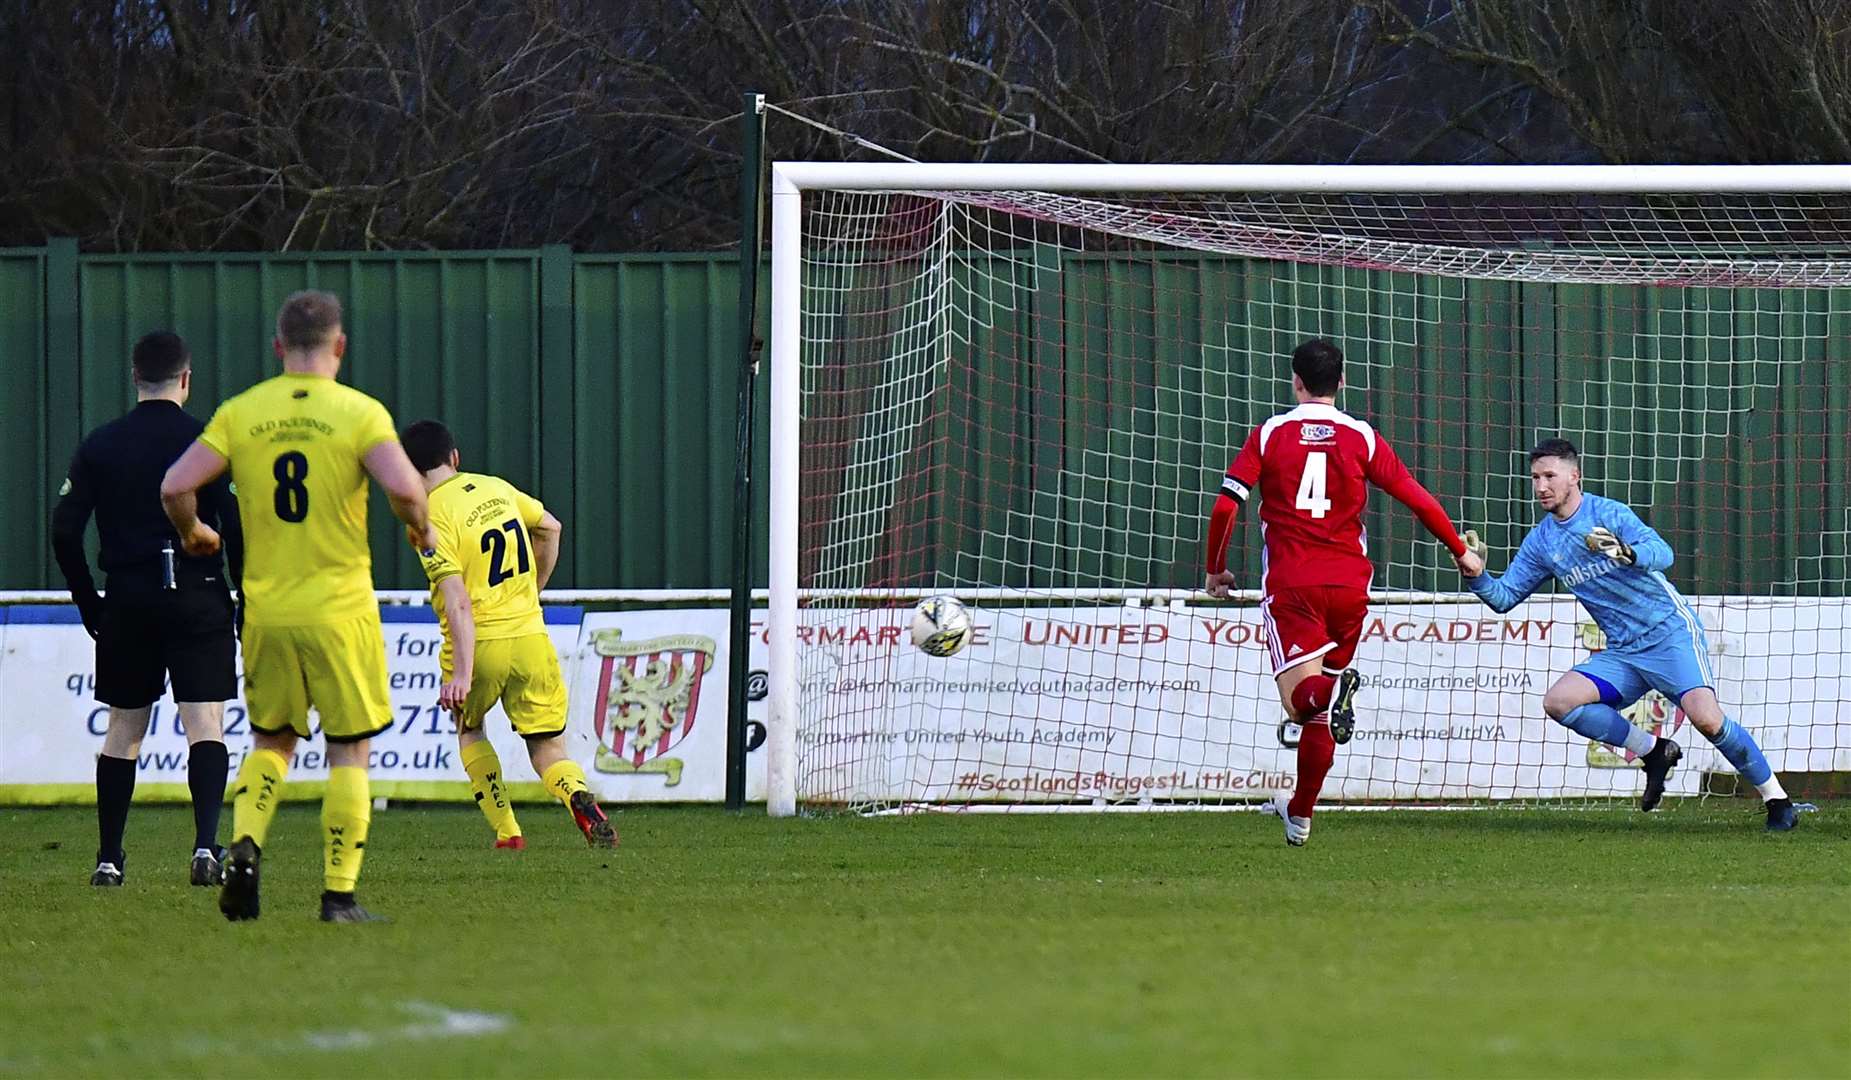 Ryan Campbell opens the scoring for Academy in the 2-1 away victory over Formartine United in December. Picture: Mel Roger